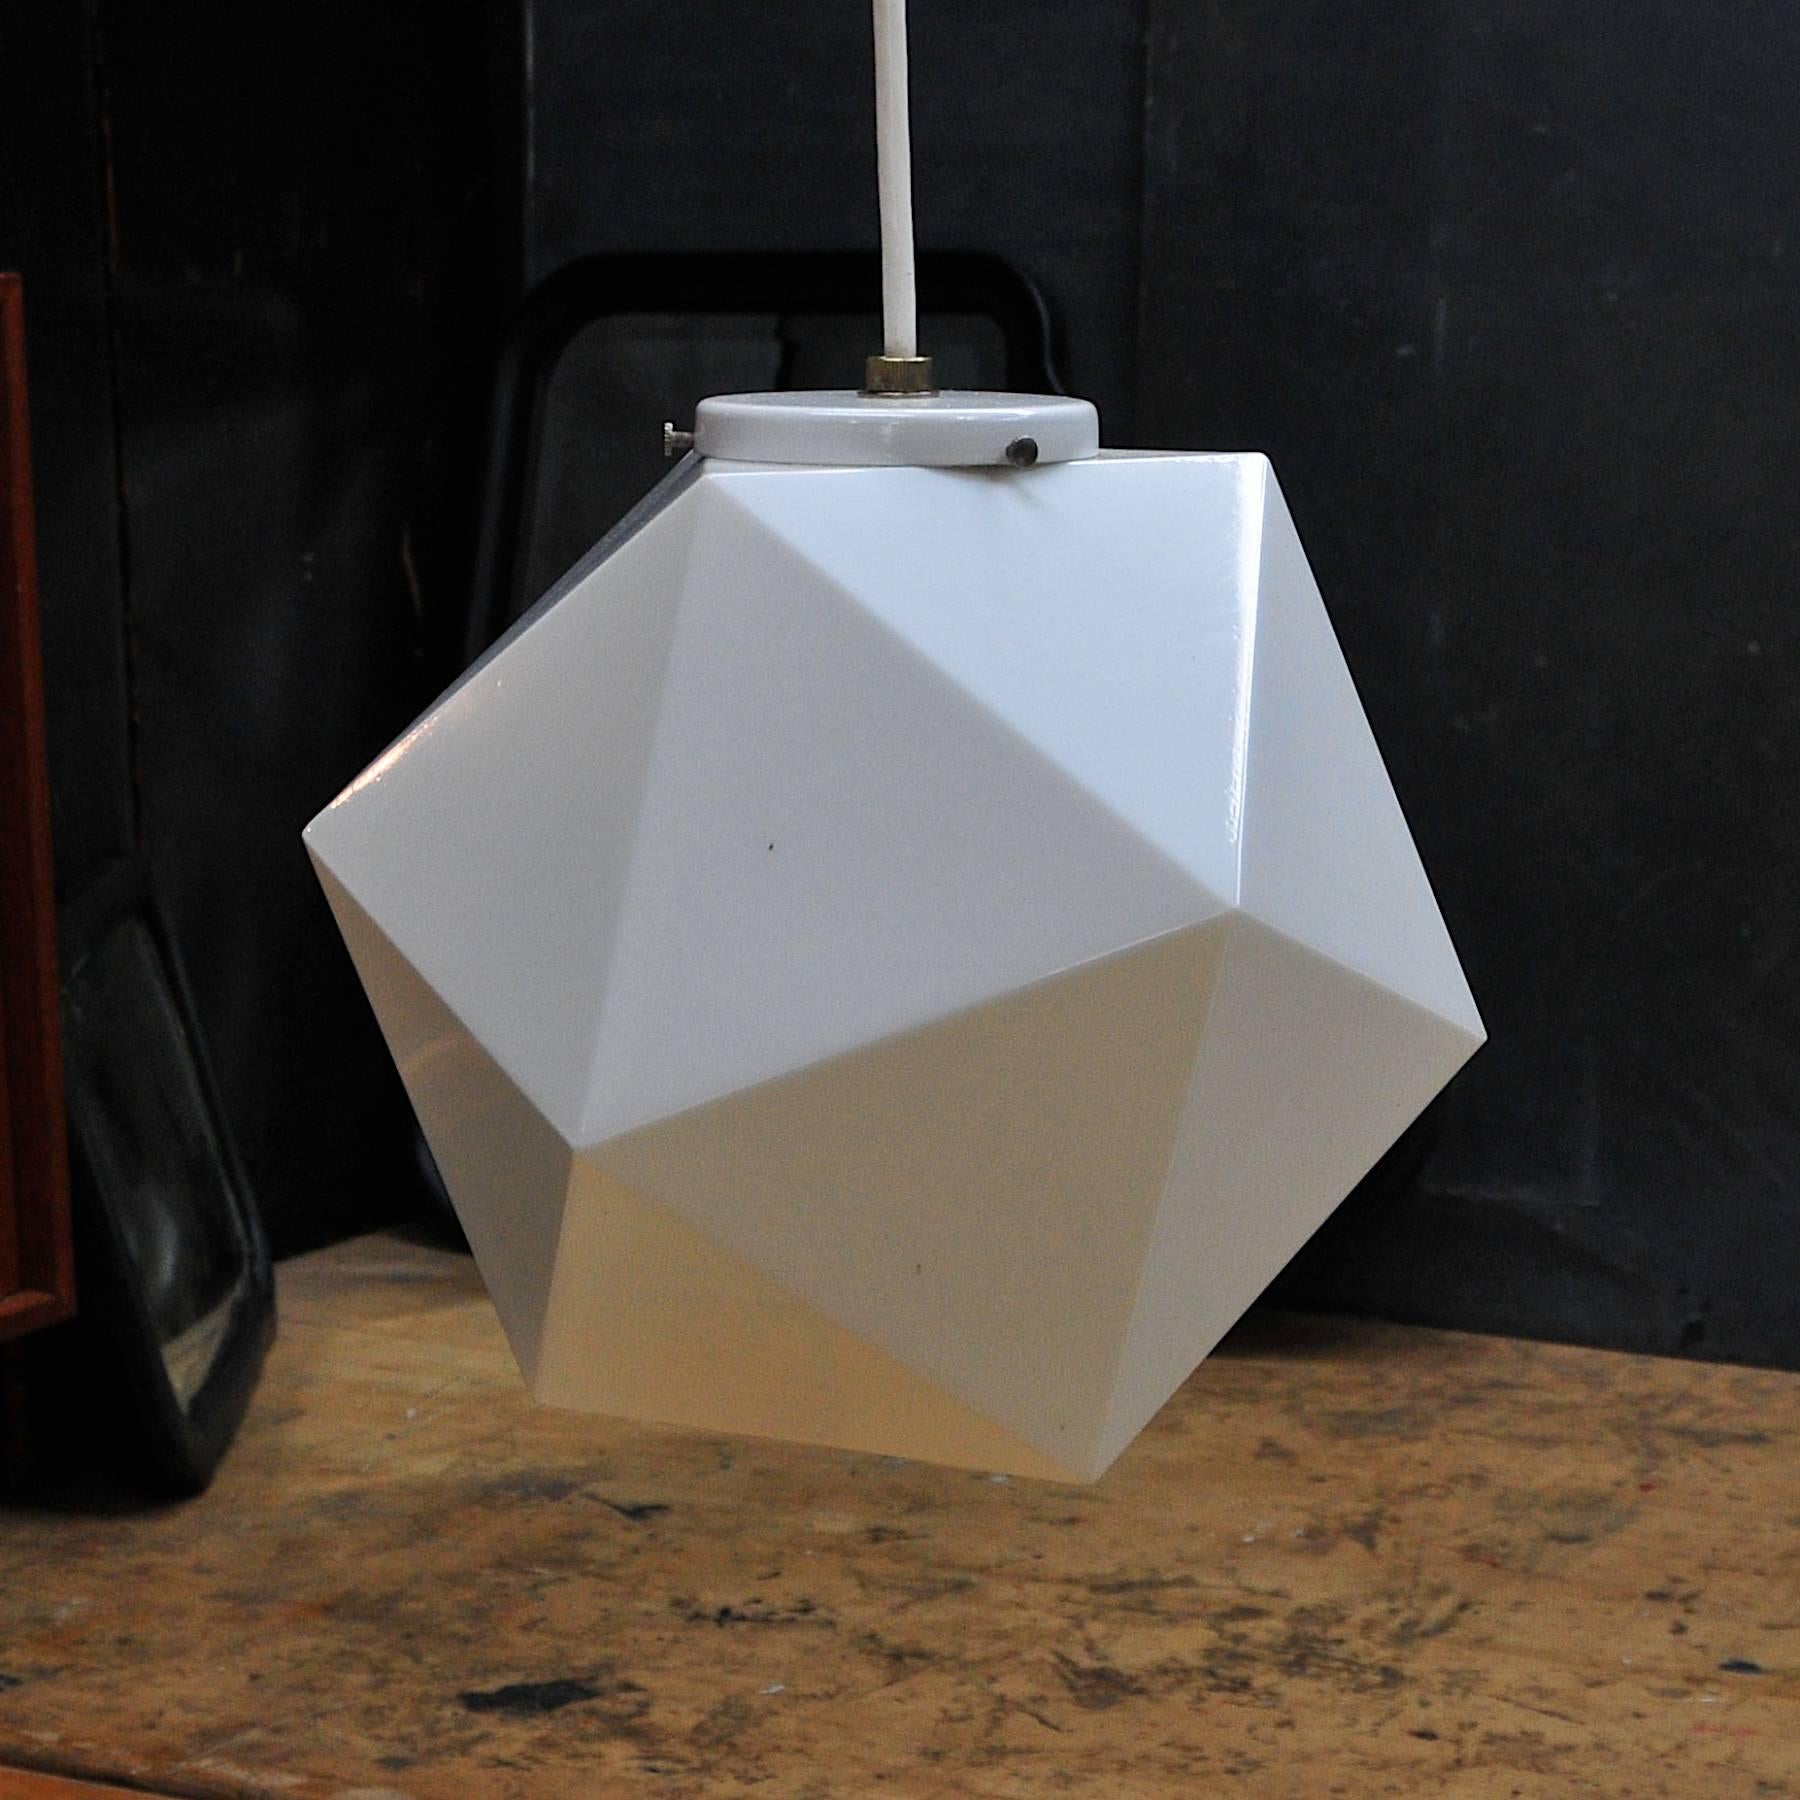 Very rare George Nelson (attributed) poly triangular icosahedron globe pendant light. Originally procured from an old Midwest music store demolished in the 1980s and these lights were stored for decades. The attribution was made by prominent Venice